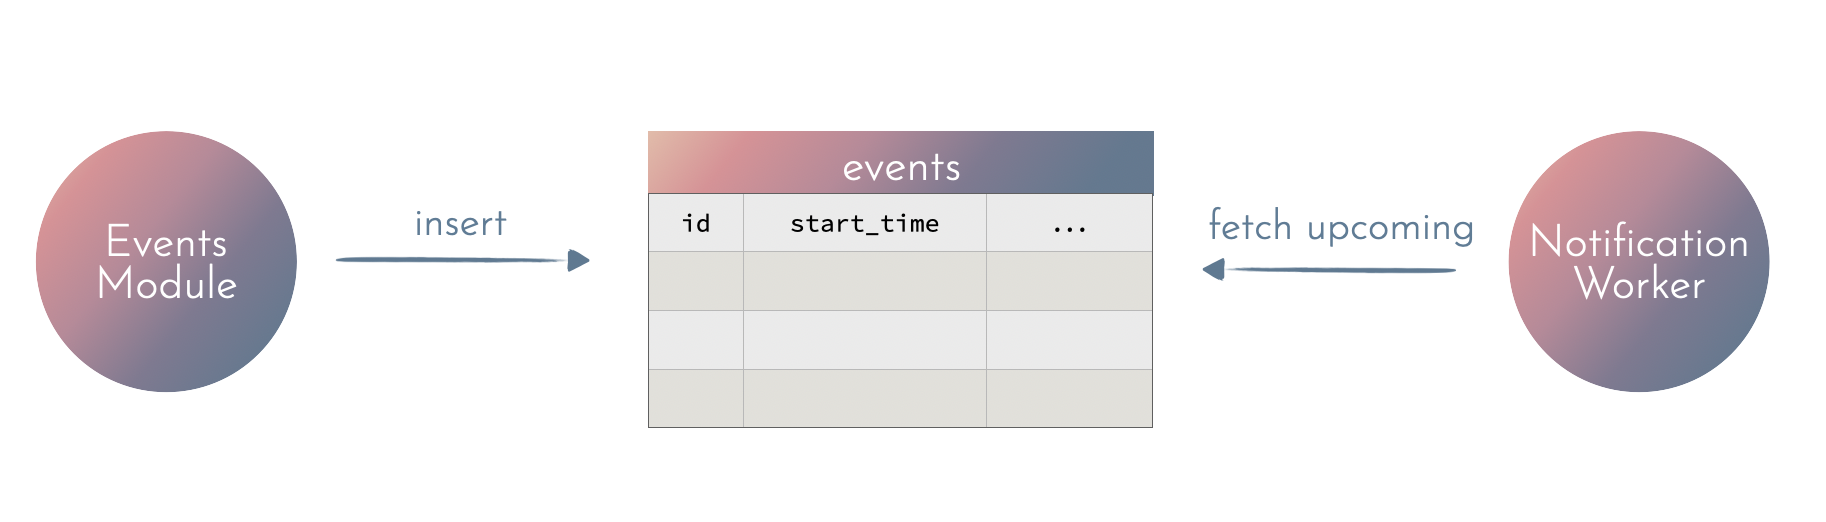 querying the events table